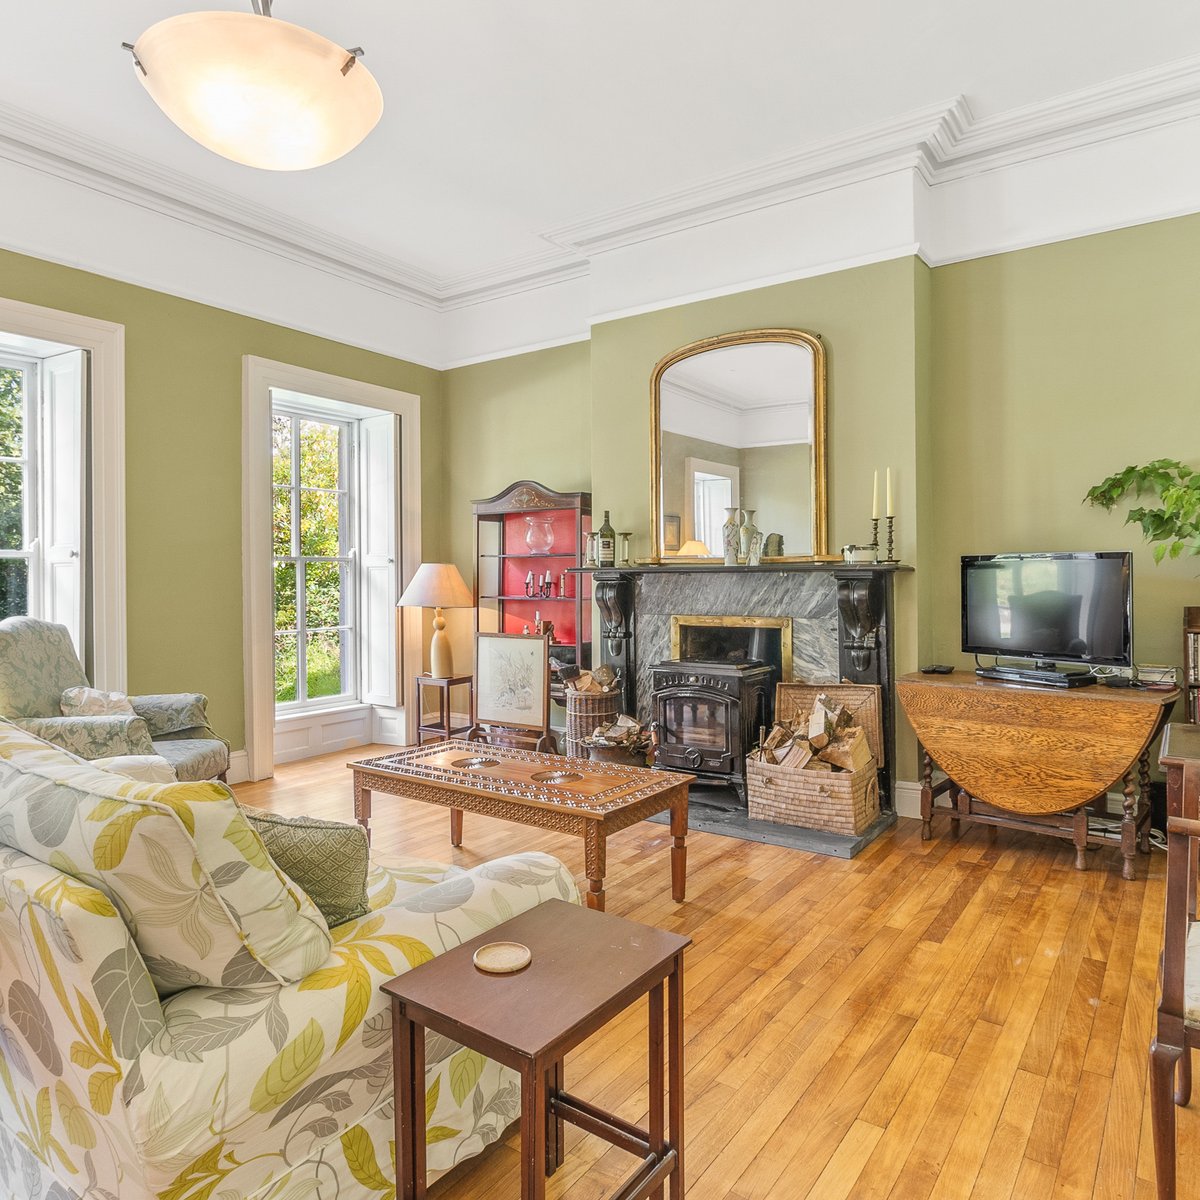 An enchanting 19th-century period house nestled in the picturesque village of Kilumney, Oven: bit.ly/3ZeIxXI 🌿

This exquisite property is represented by our expert Eileen Neville in our Cork office.

#Cork #IrishProperty #IrishCountryside